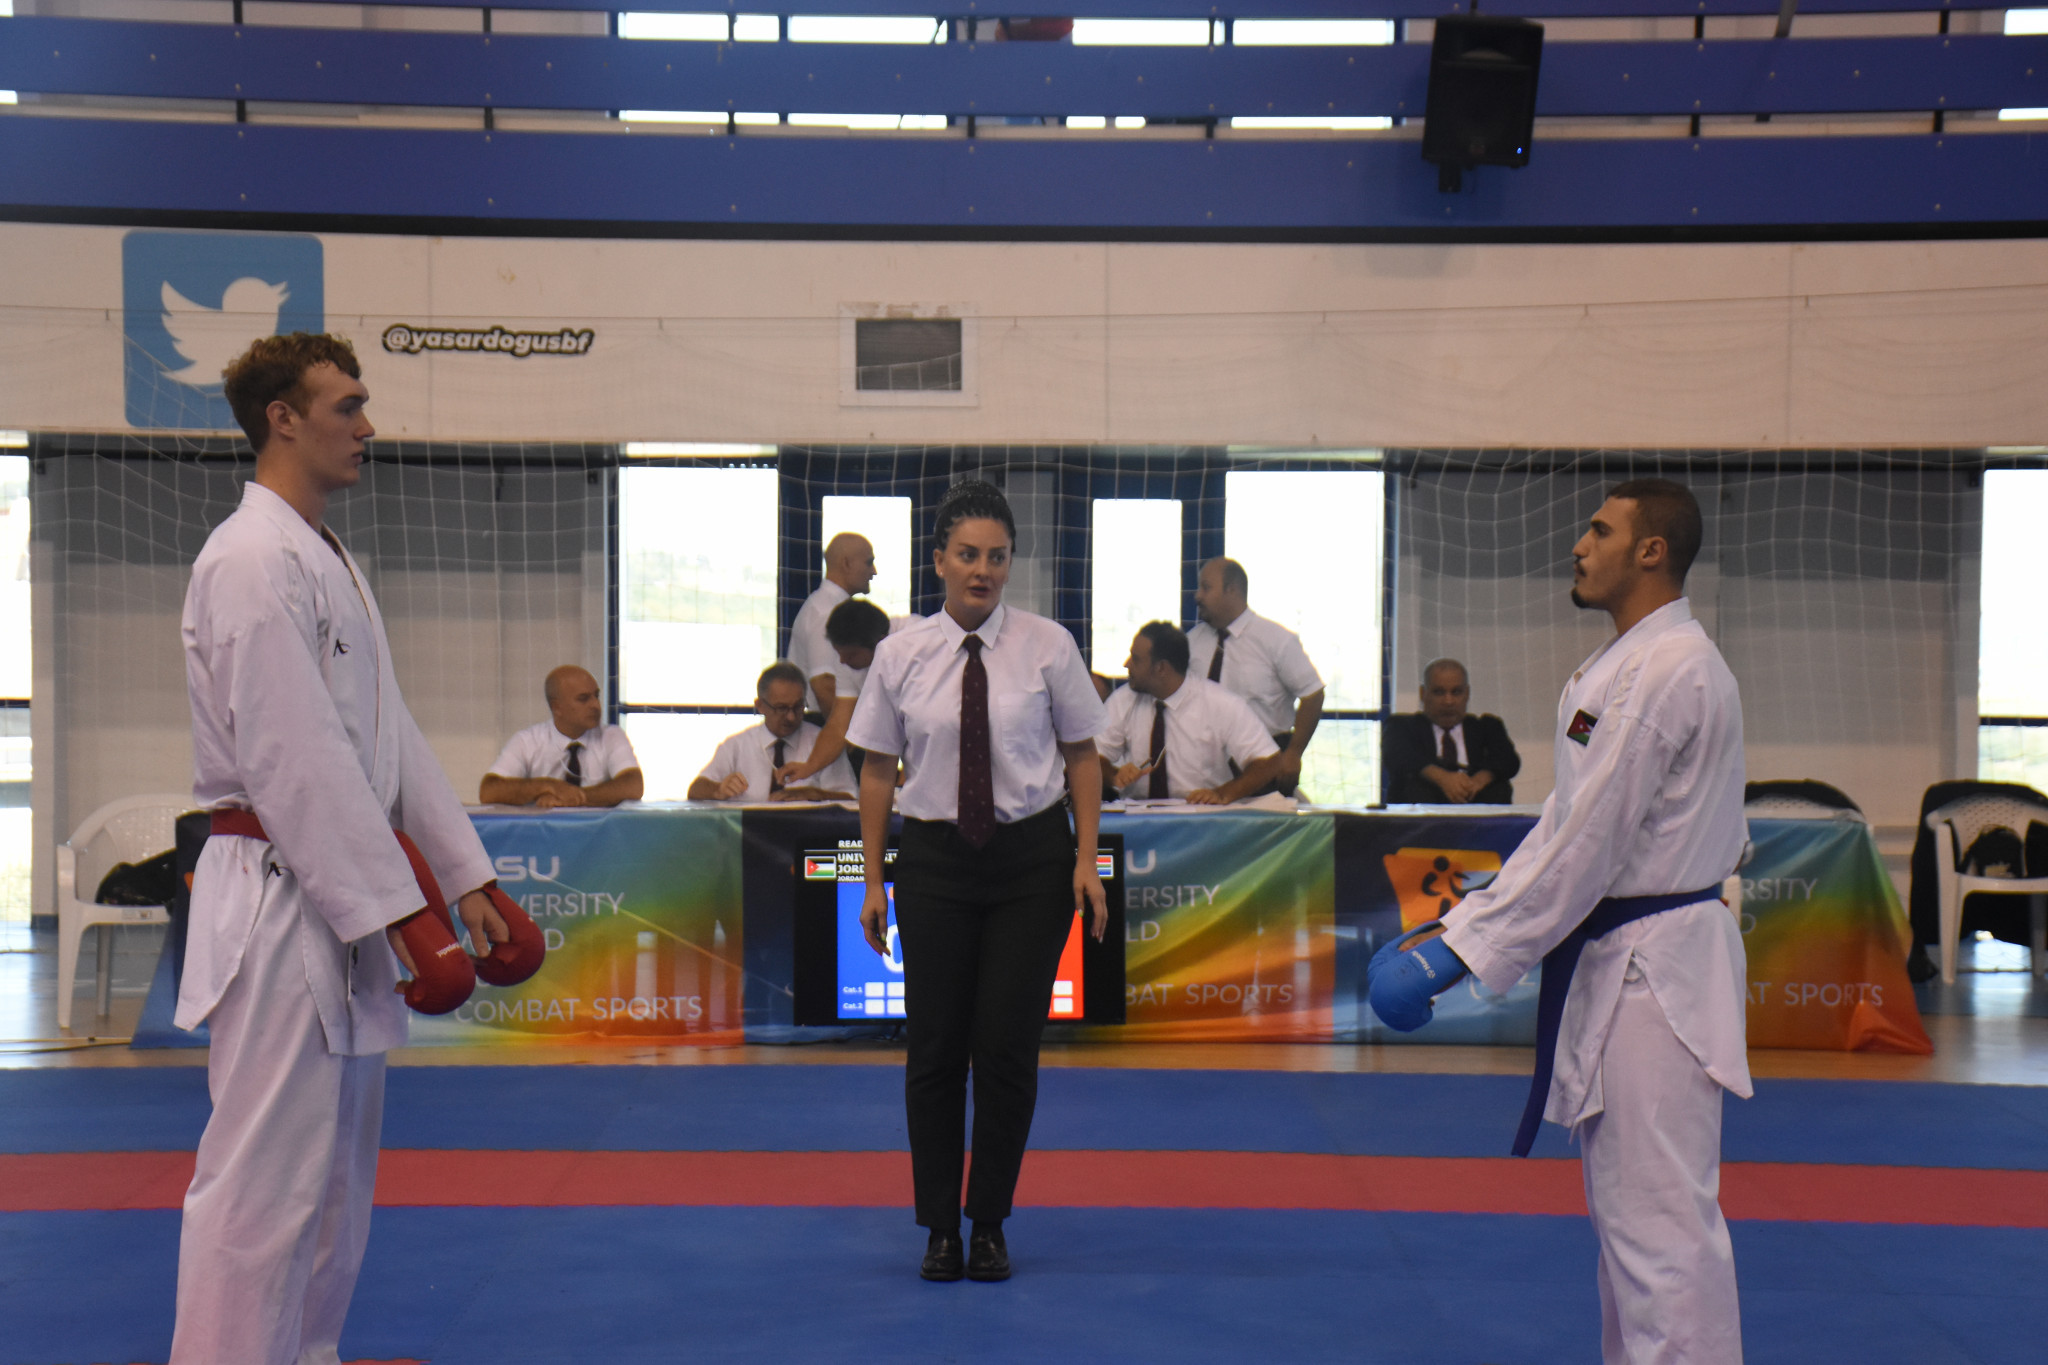 Karate confirmed its finalists today at the FISU World Cup Combat Sports ©FISU